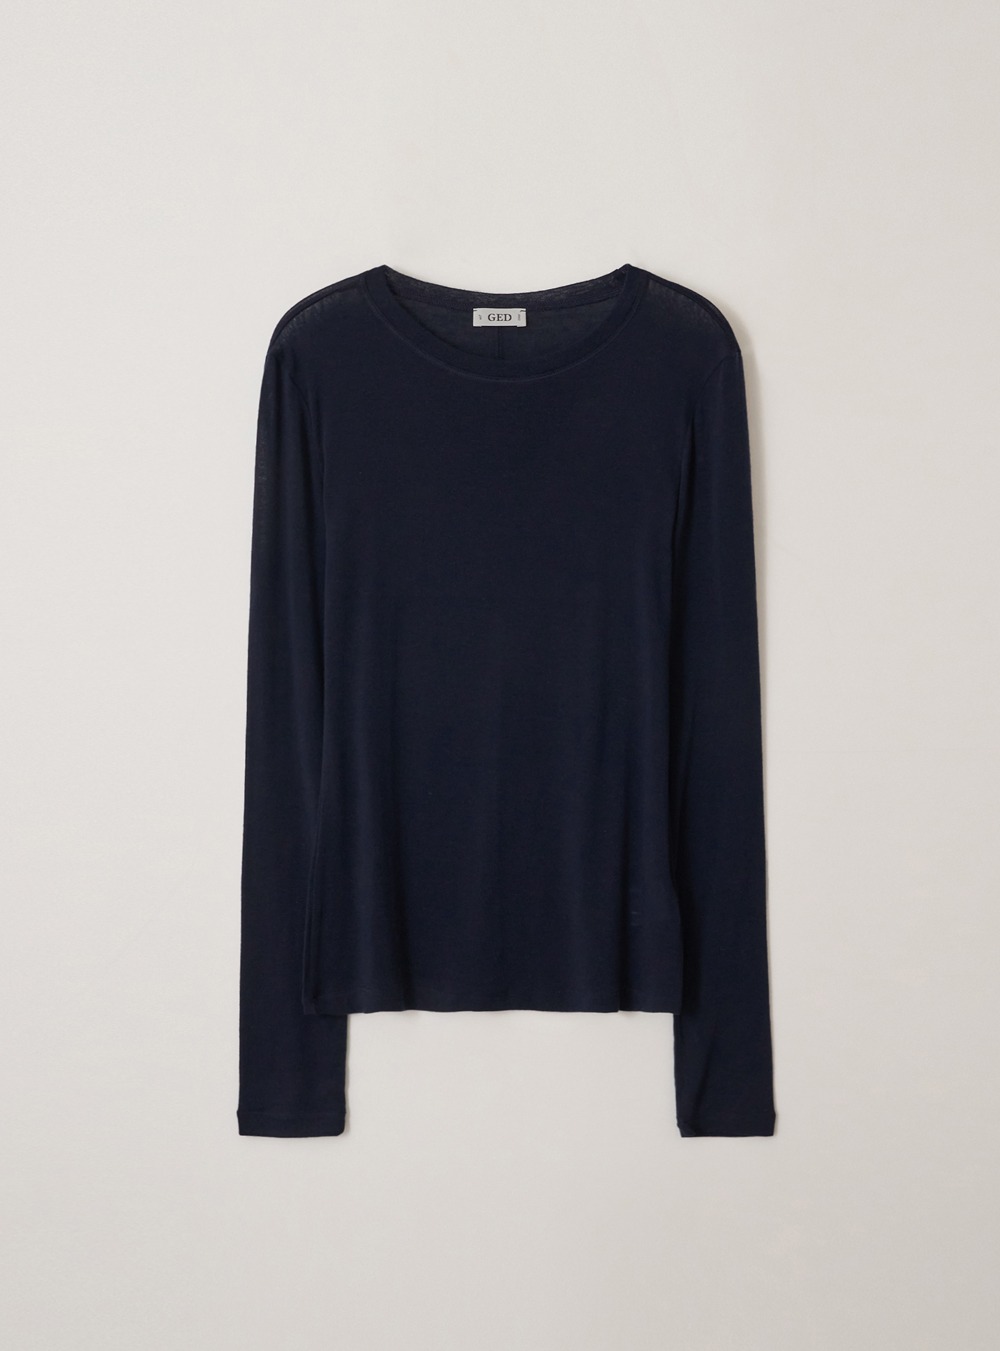 2ND_LAYERED SLEEVE TOP - NAVY